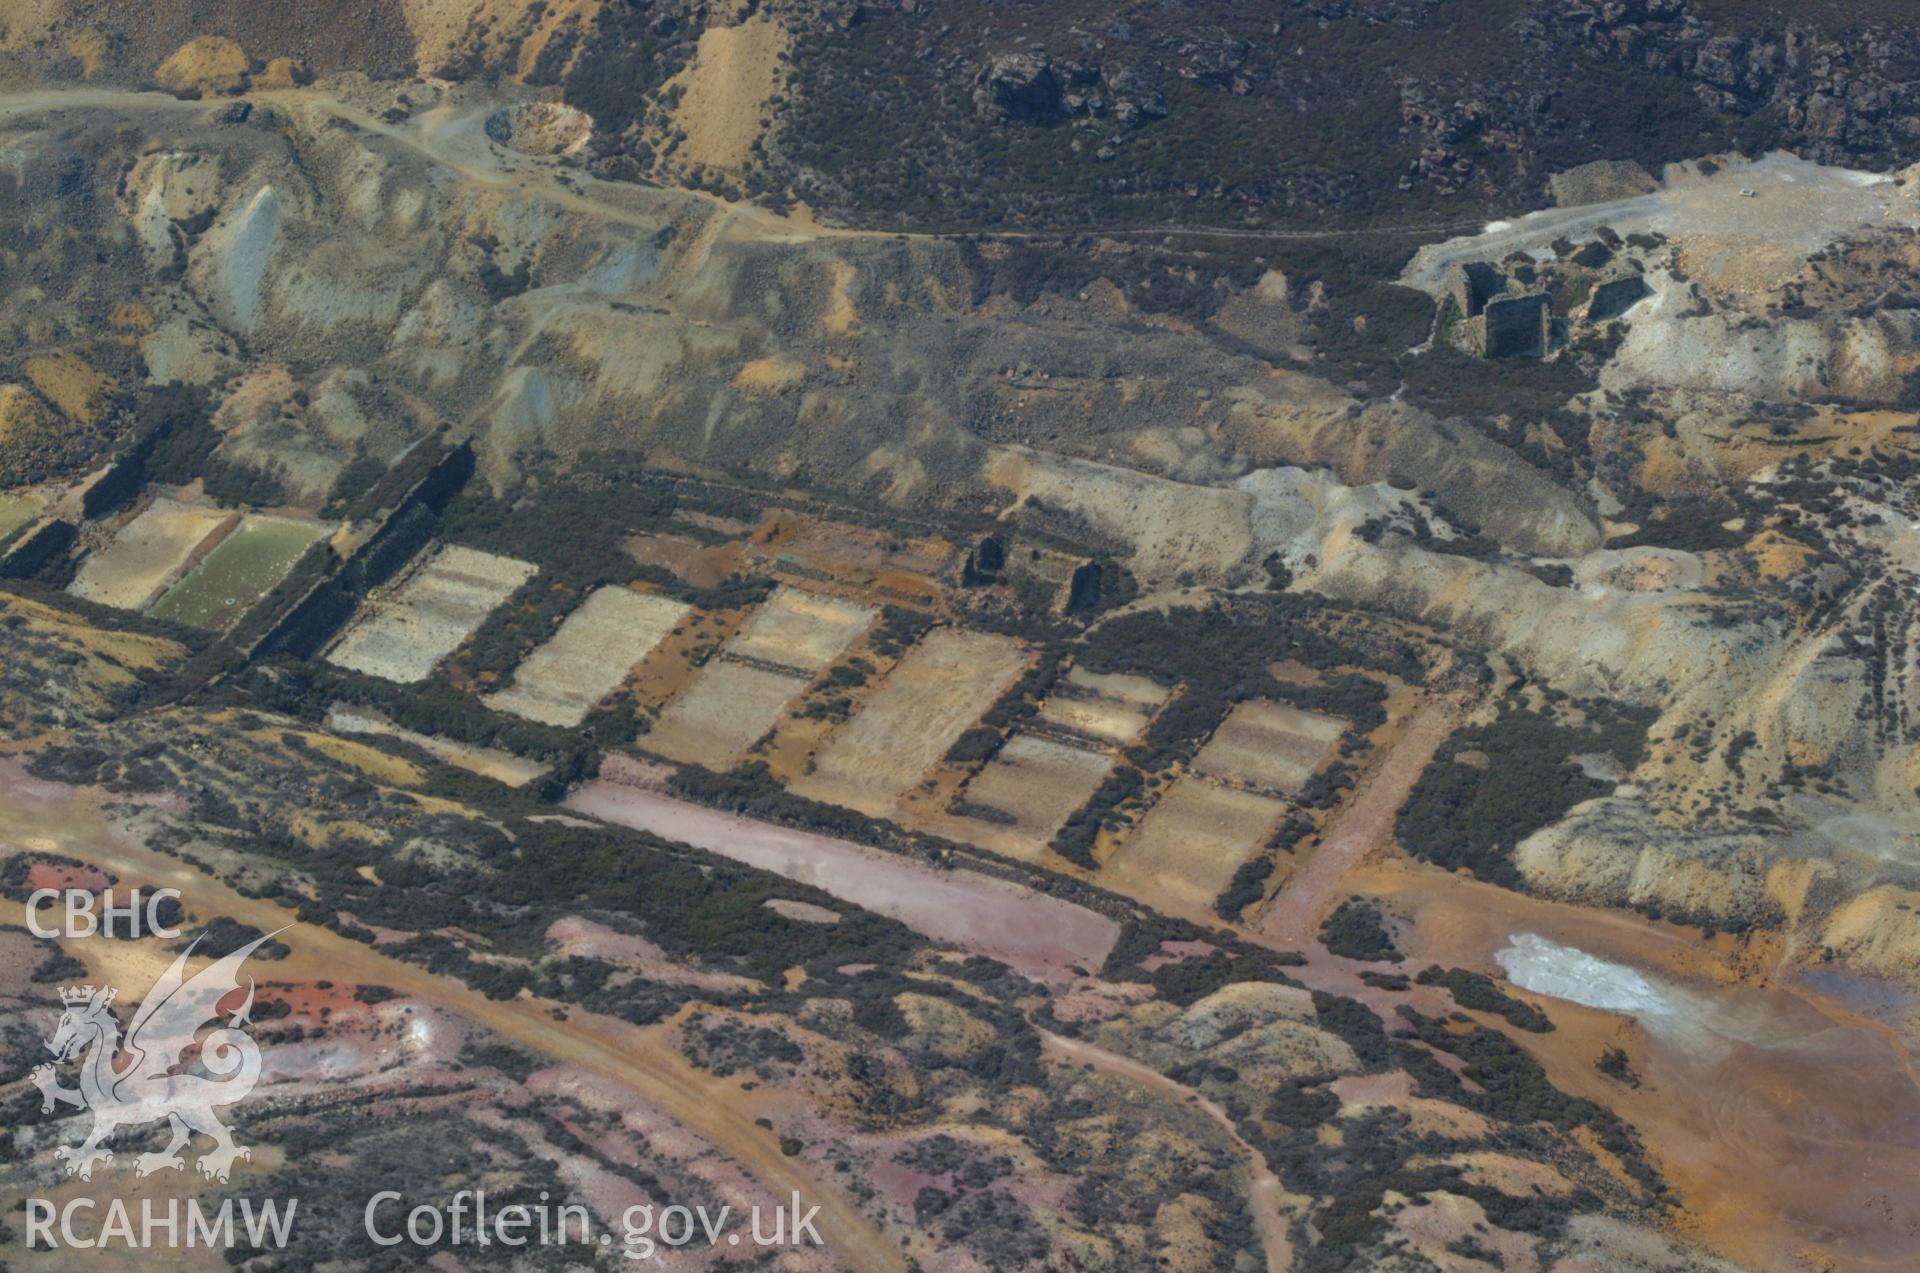 RCAHMW colour oblique aerial photograph of Parys Copper Mine, Amlwch taken on 26/05/2004 by Toby Driver